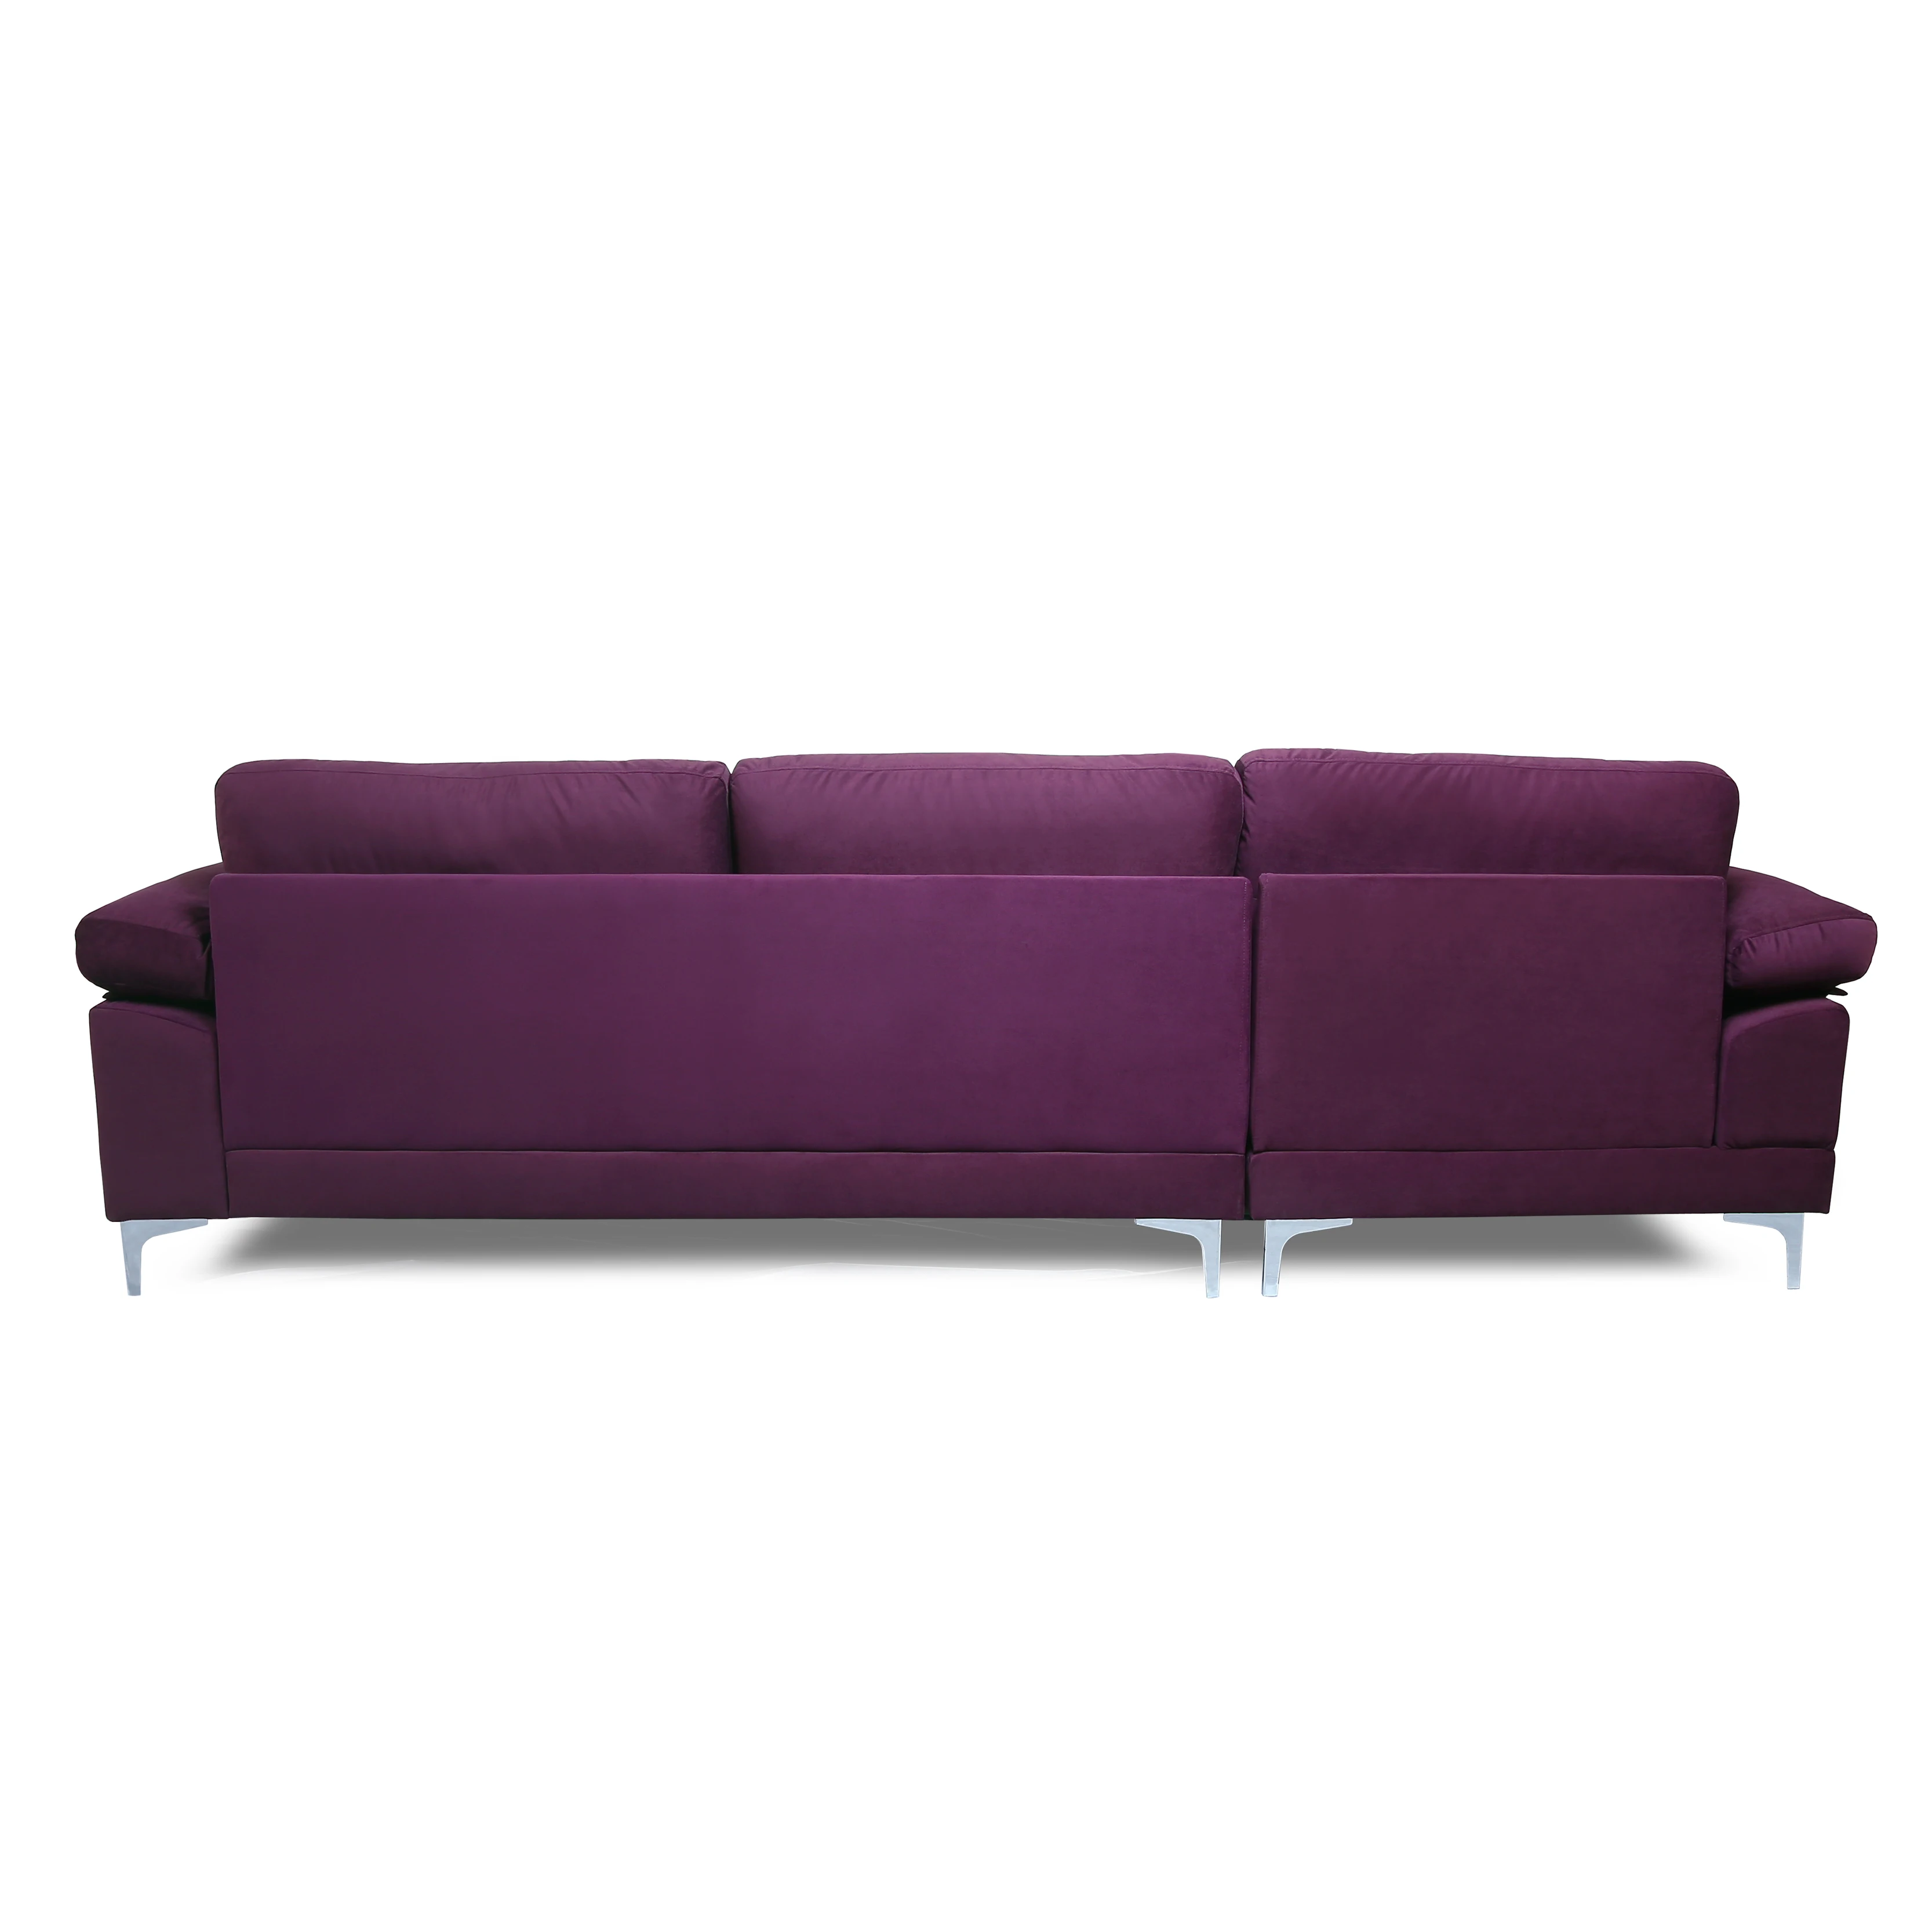 

Elegant convertible sofa purple velvet couch living room sofa set furniture with bed in it